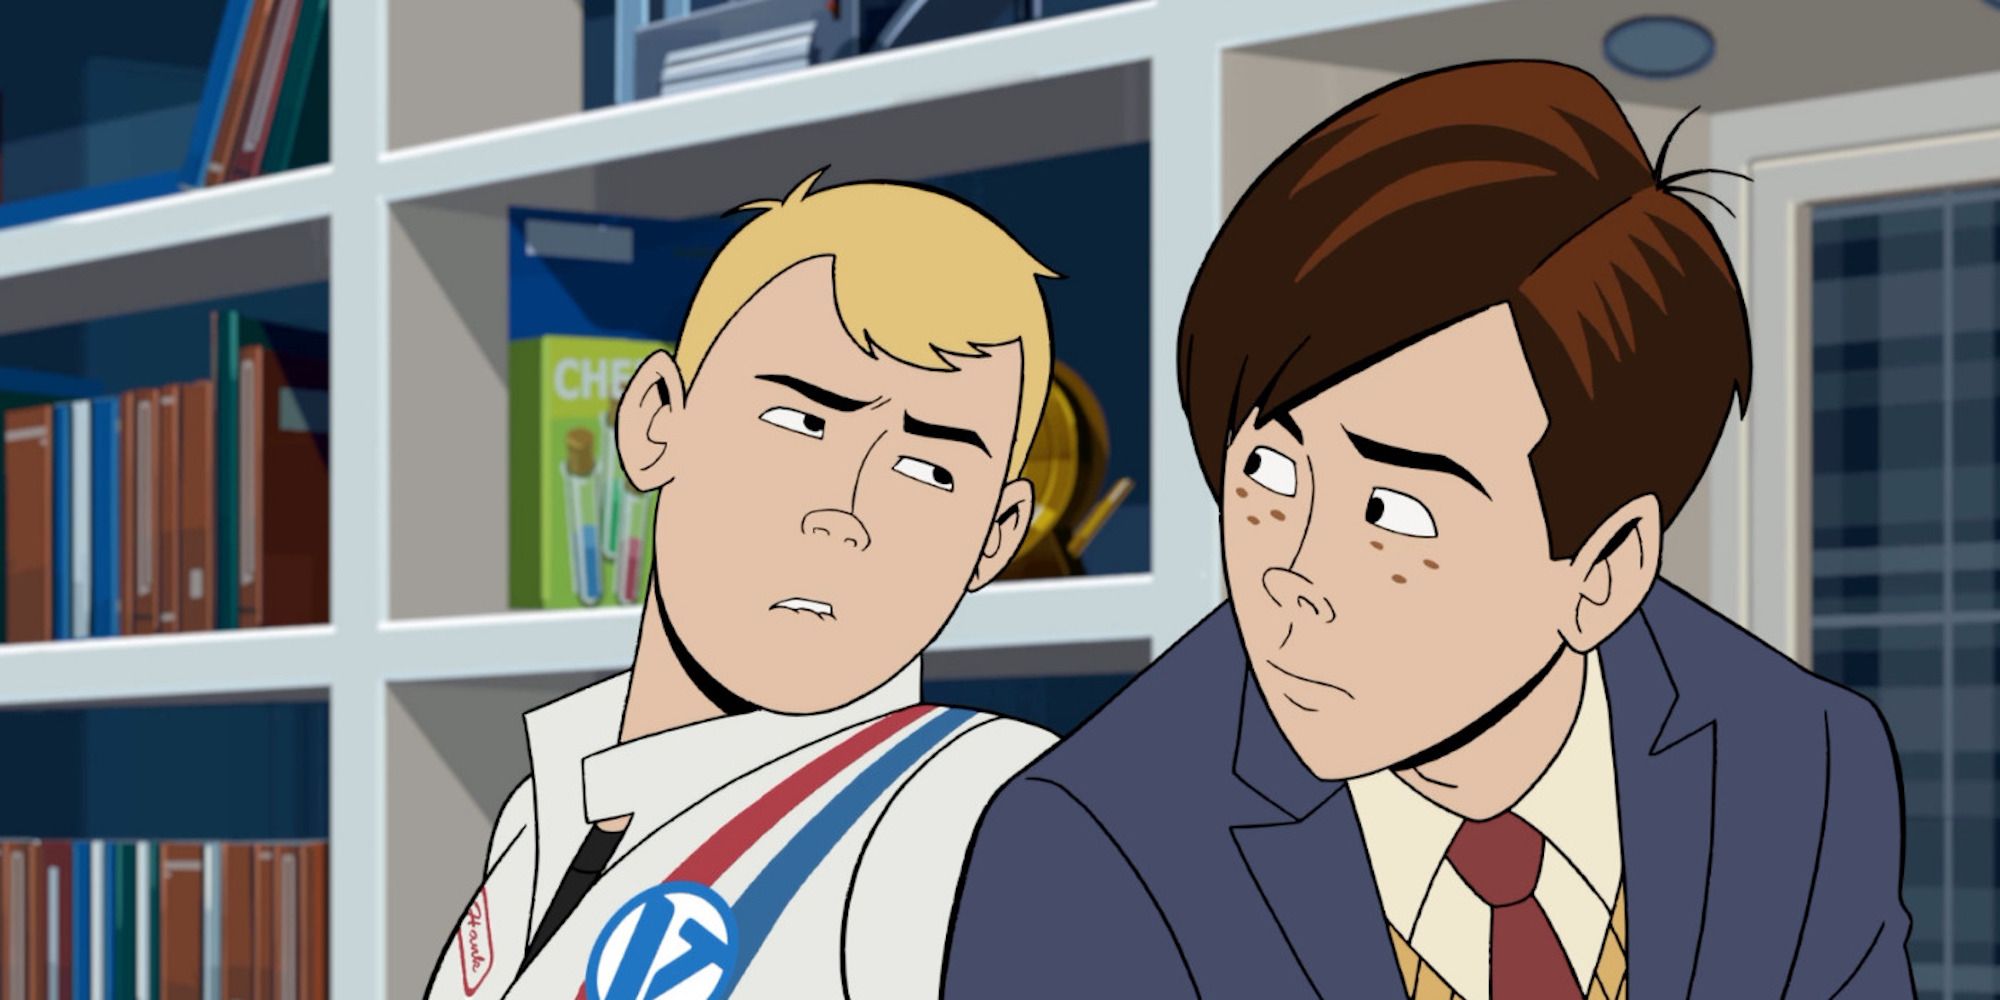 Hank and Dean in The Venture Bros